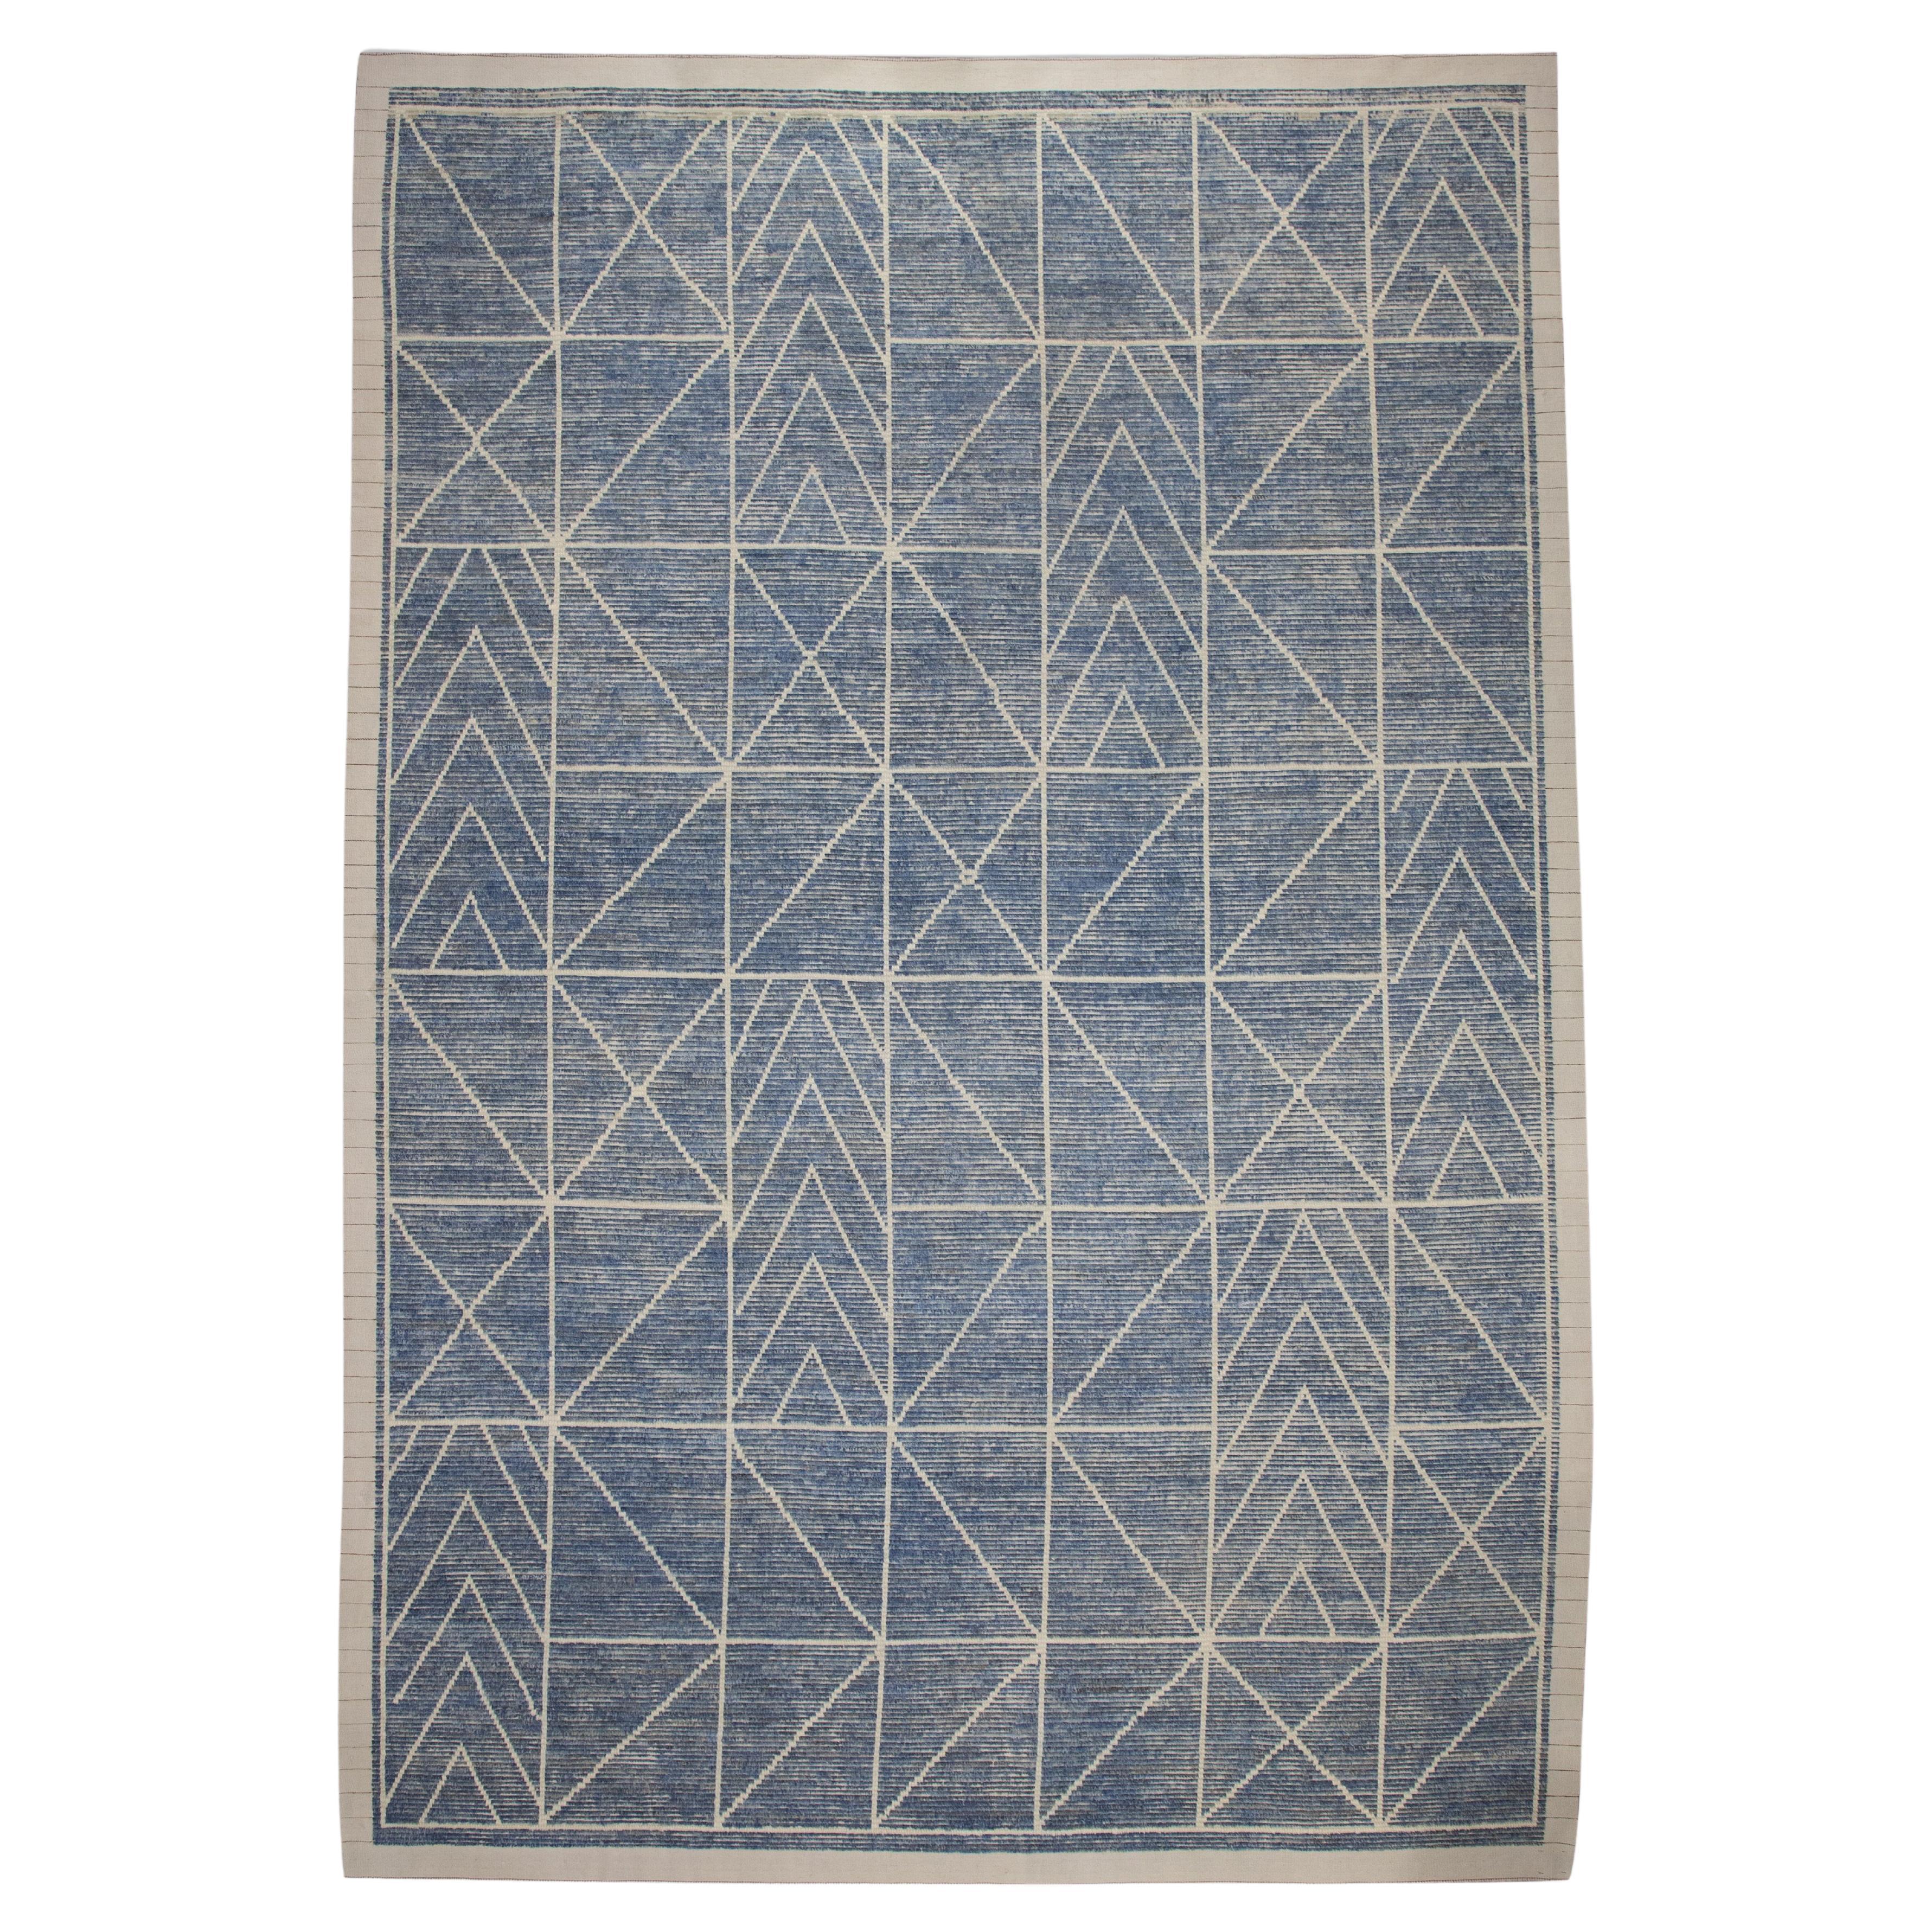 21st Century Modern Moroccan Style Wool Rug in Blue Design 10'3" X 14'9" For Sale